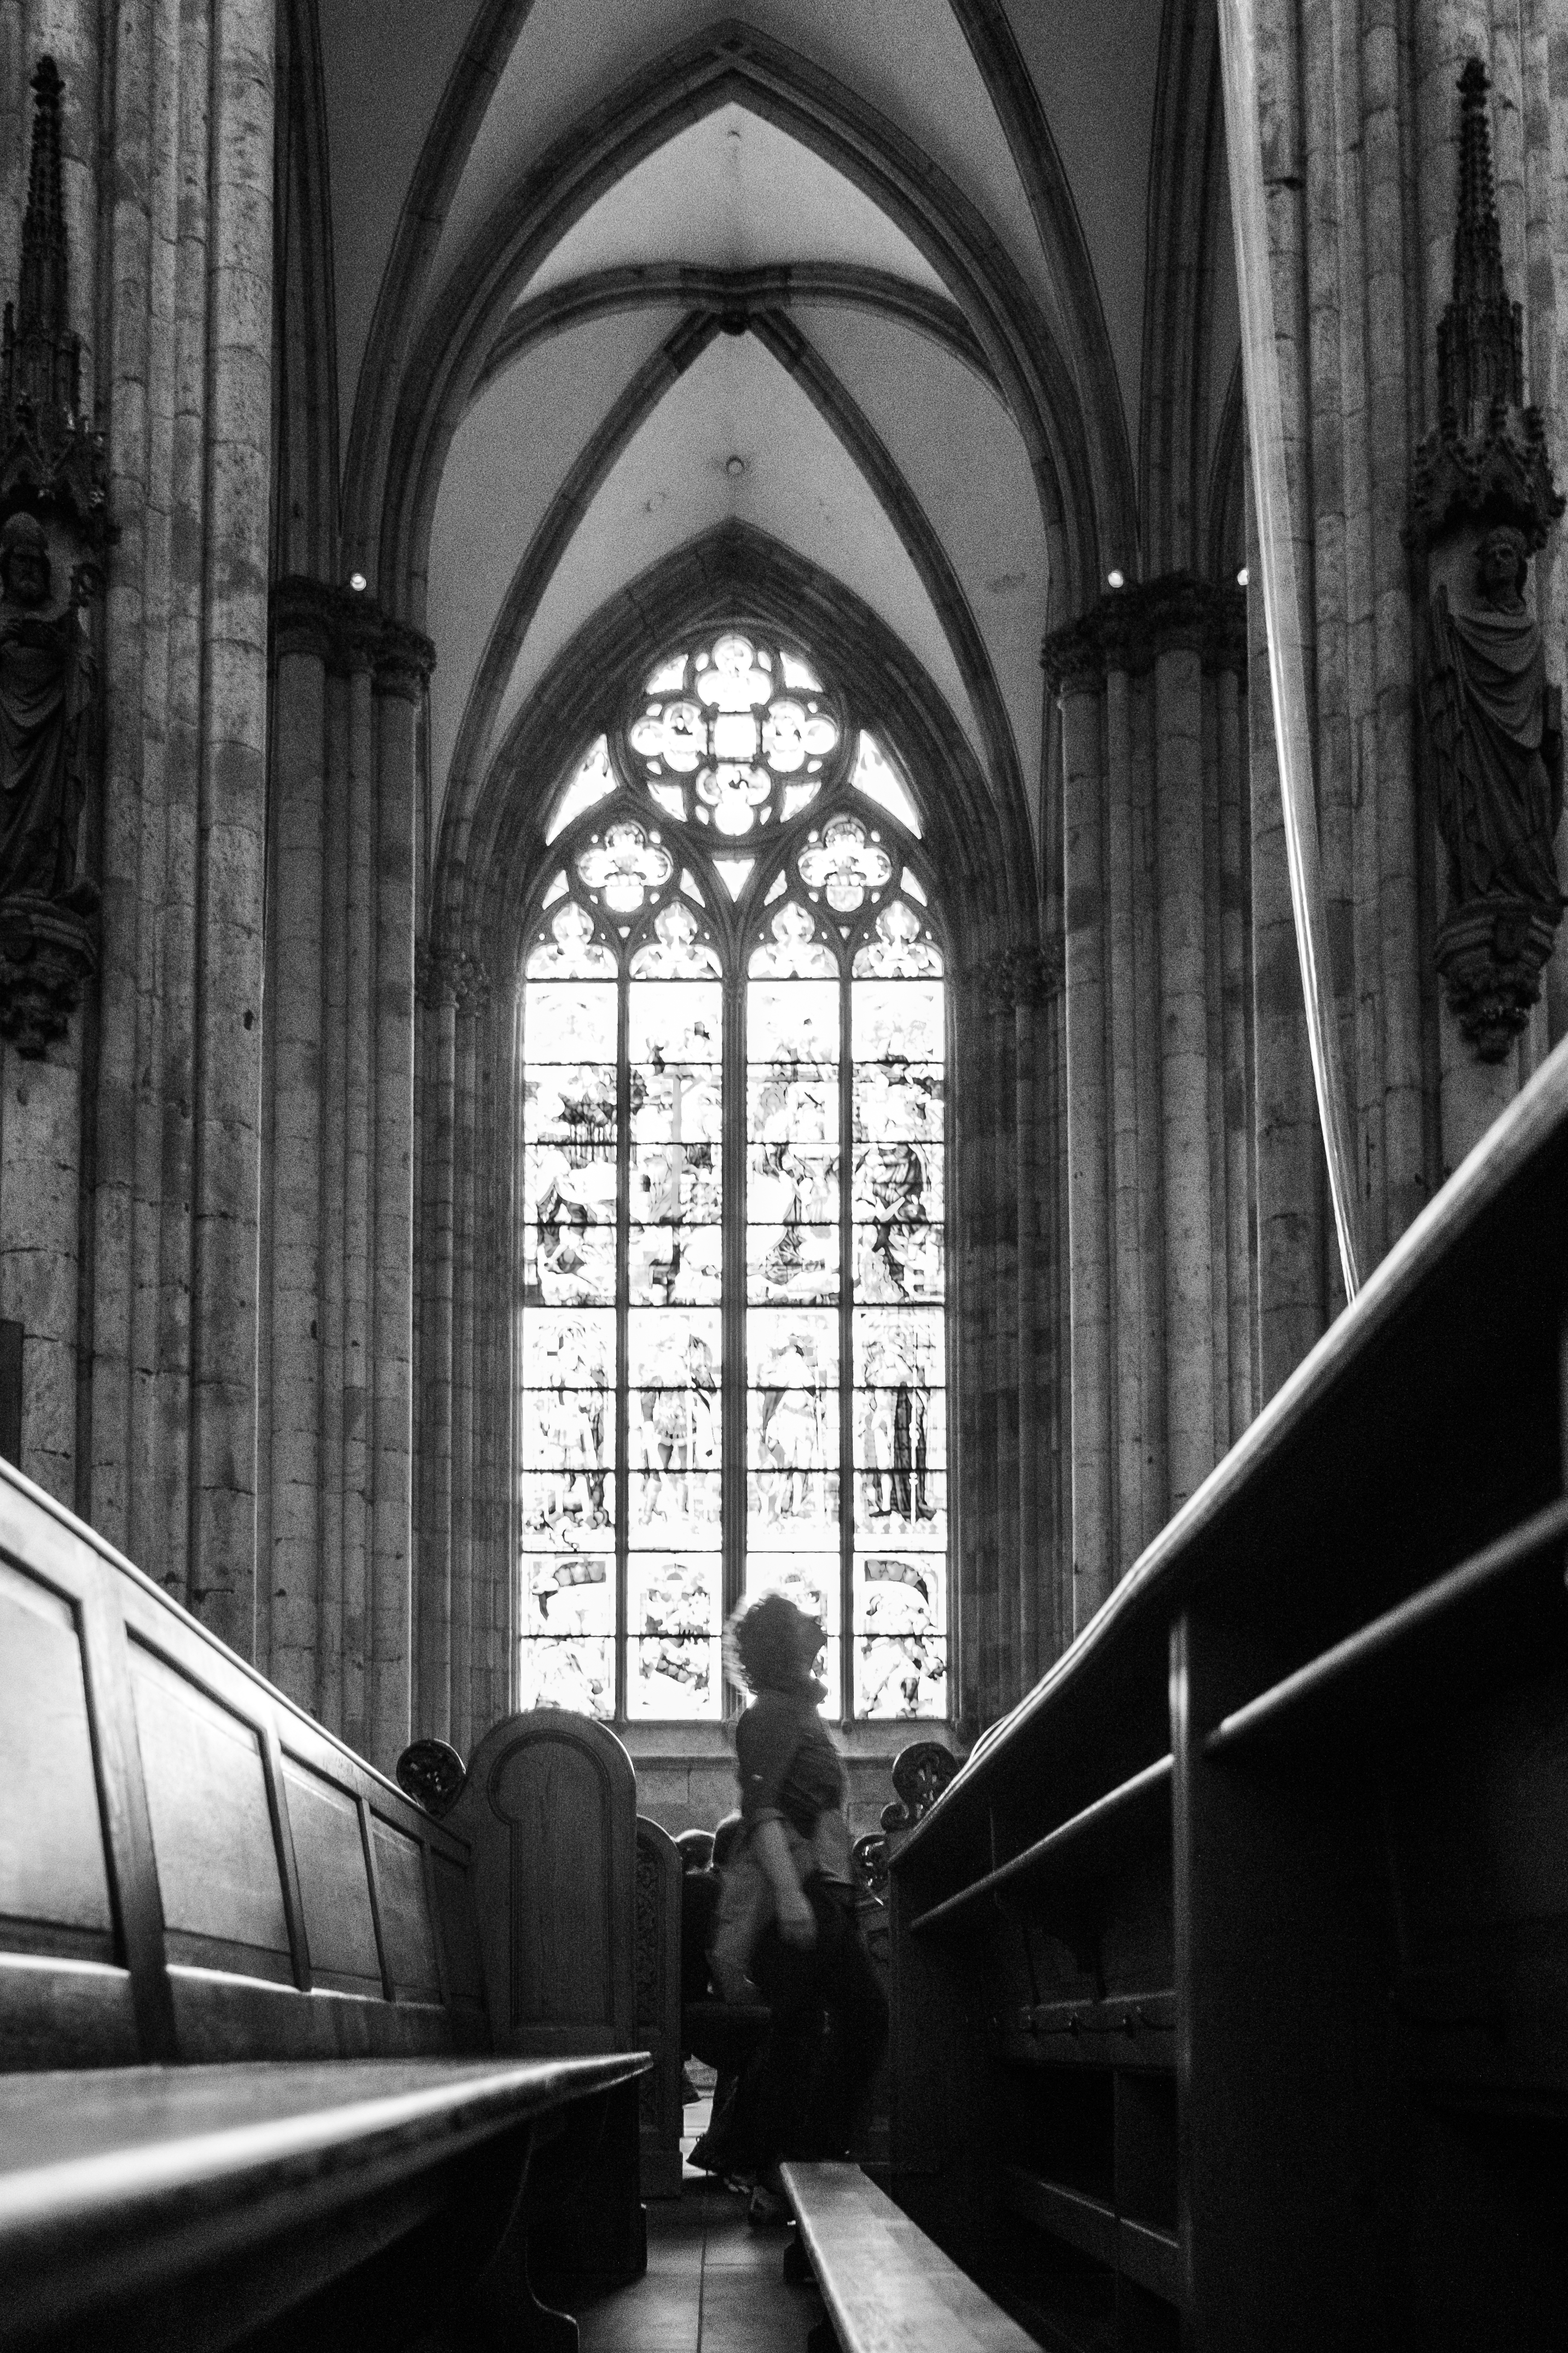 A solitary figure stands in a church with flying buttresses under a stained glass window